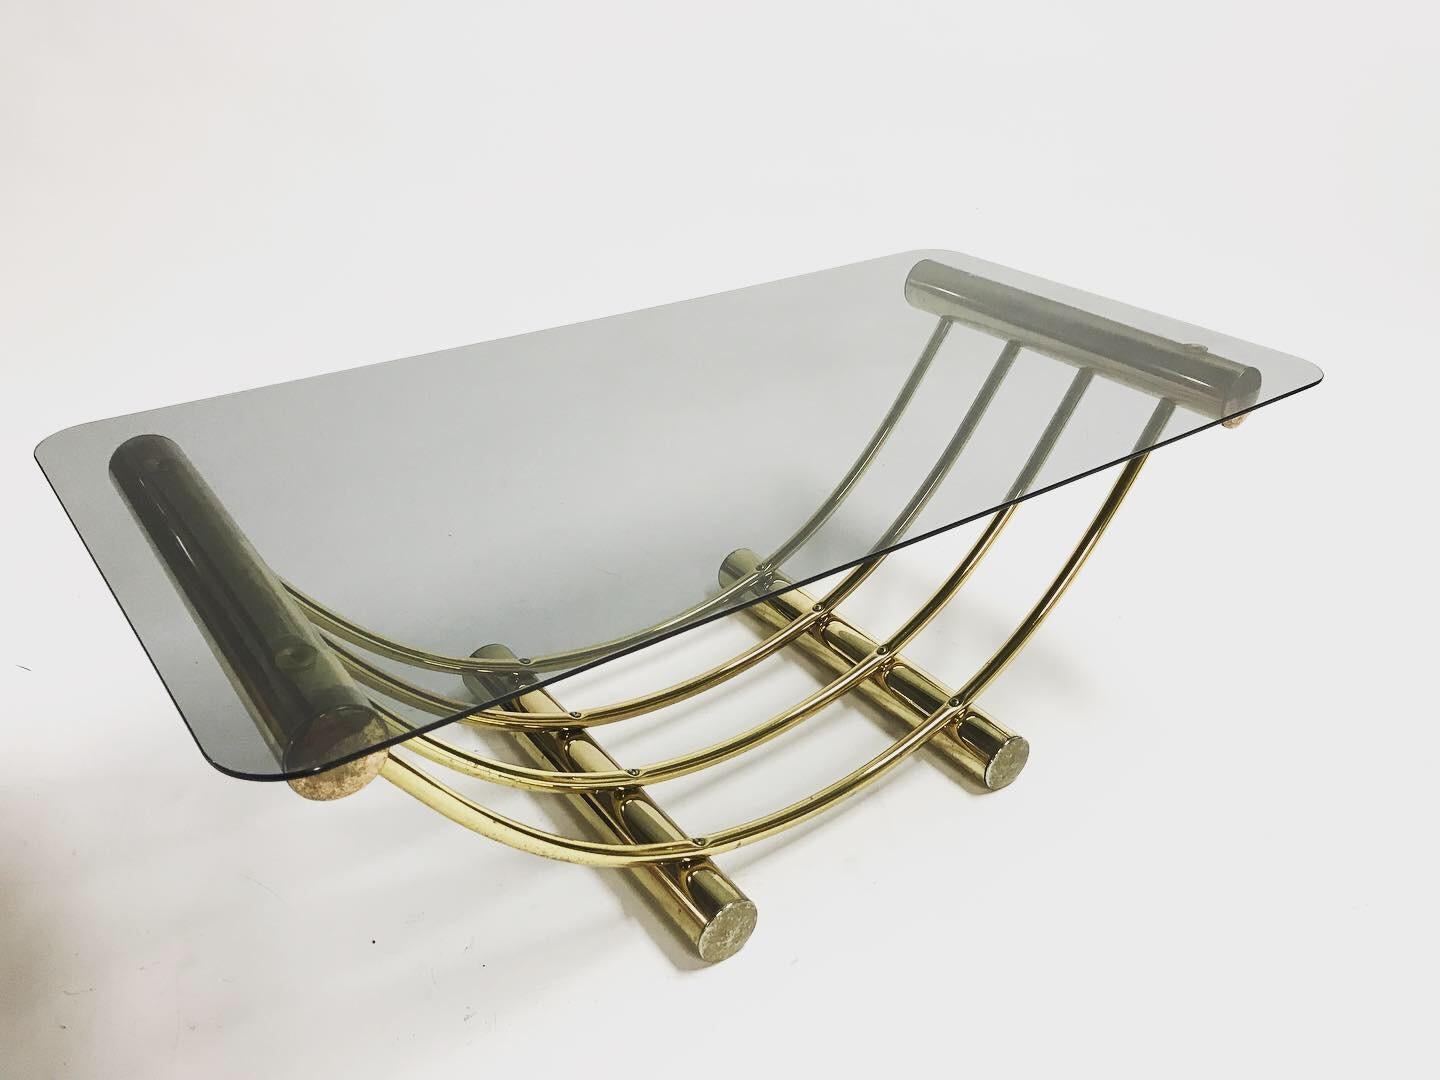 Brass 'arch' coffee table in the style of Romeo Rega.

The table has a rounded smoked glass top, typical for the seventies.

The table was made in Belgium by Belgochrom.

1970s, Belgium

Slight patina on the brass

Dimensions:
Height